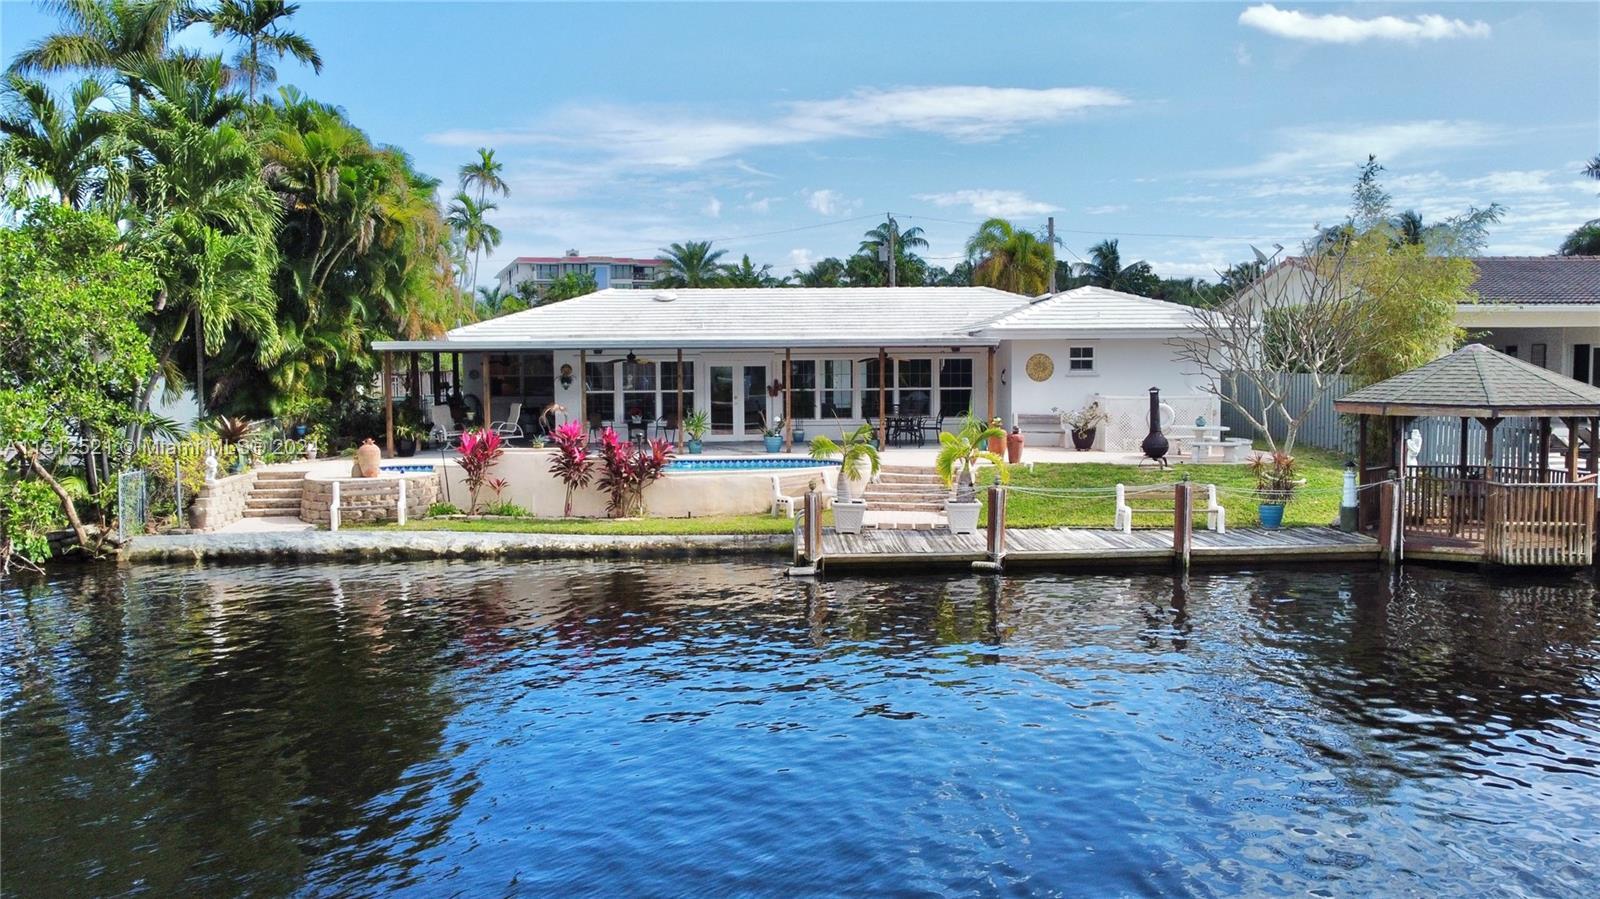 Waterfront Ocean Access Home. Located in Gated Bal Harbour One of Fort Lauderdale’s best kept secret